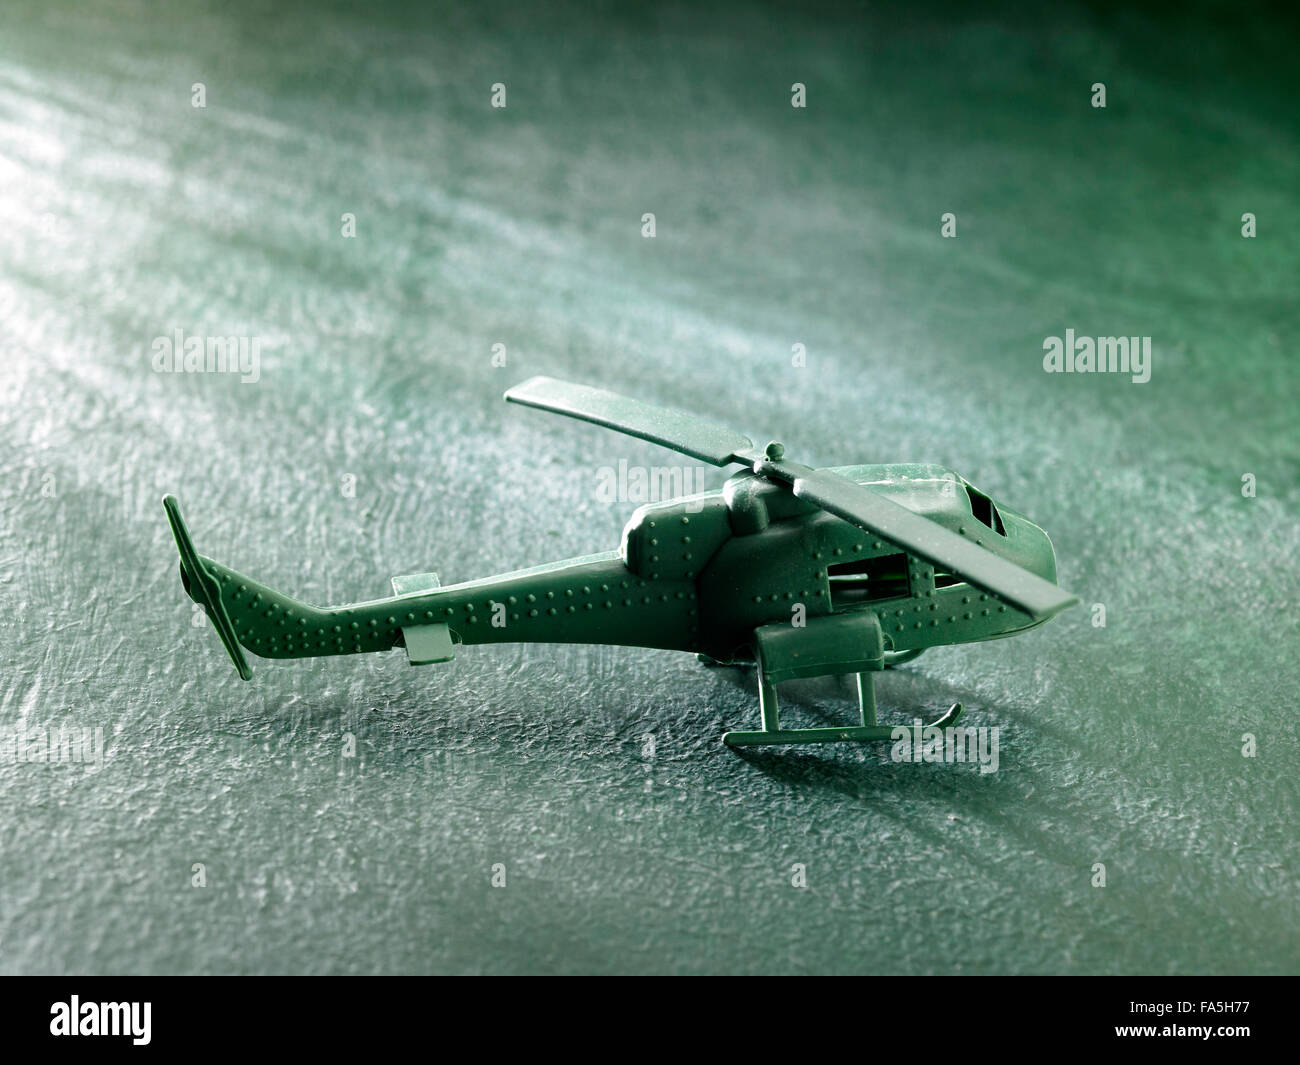 green plastic toy helicopter on the green background Stock Photo